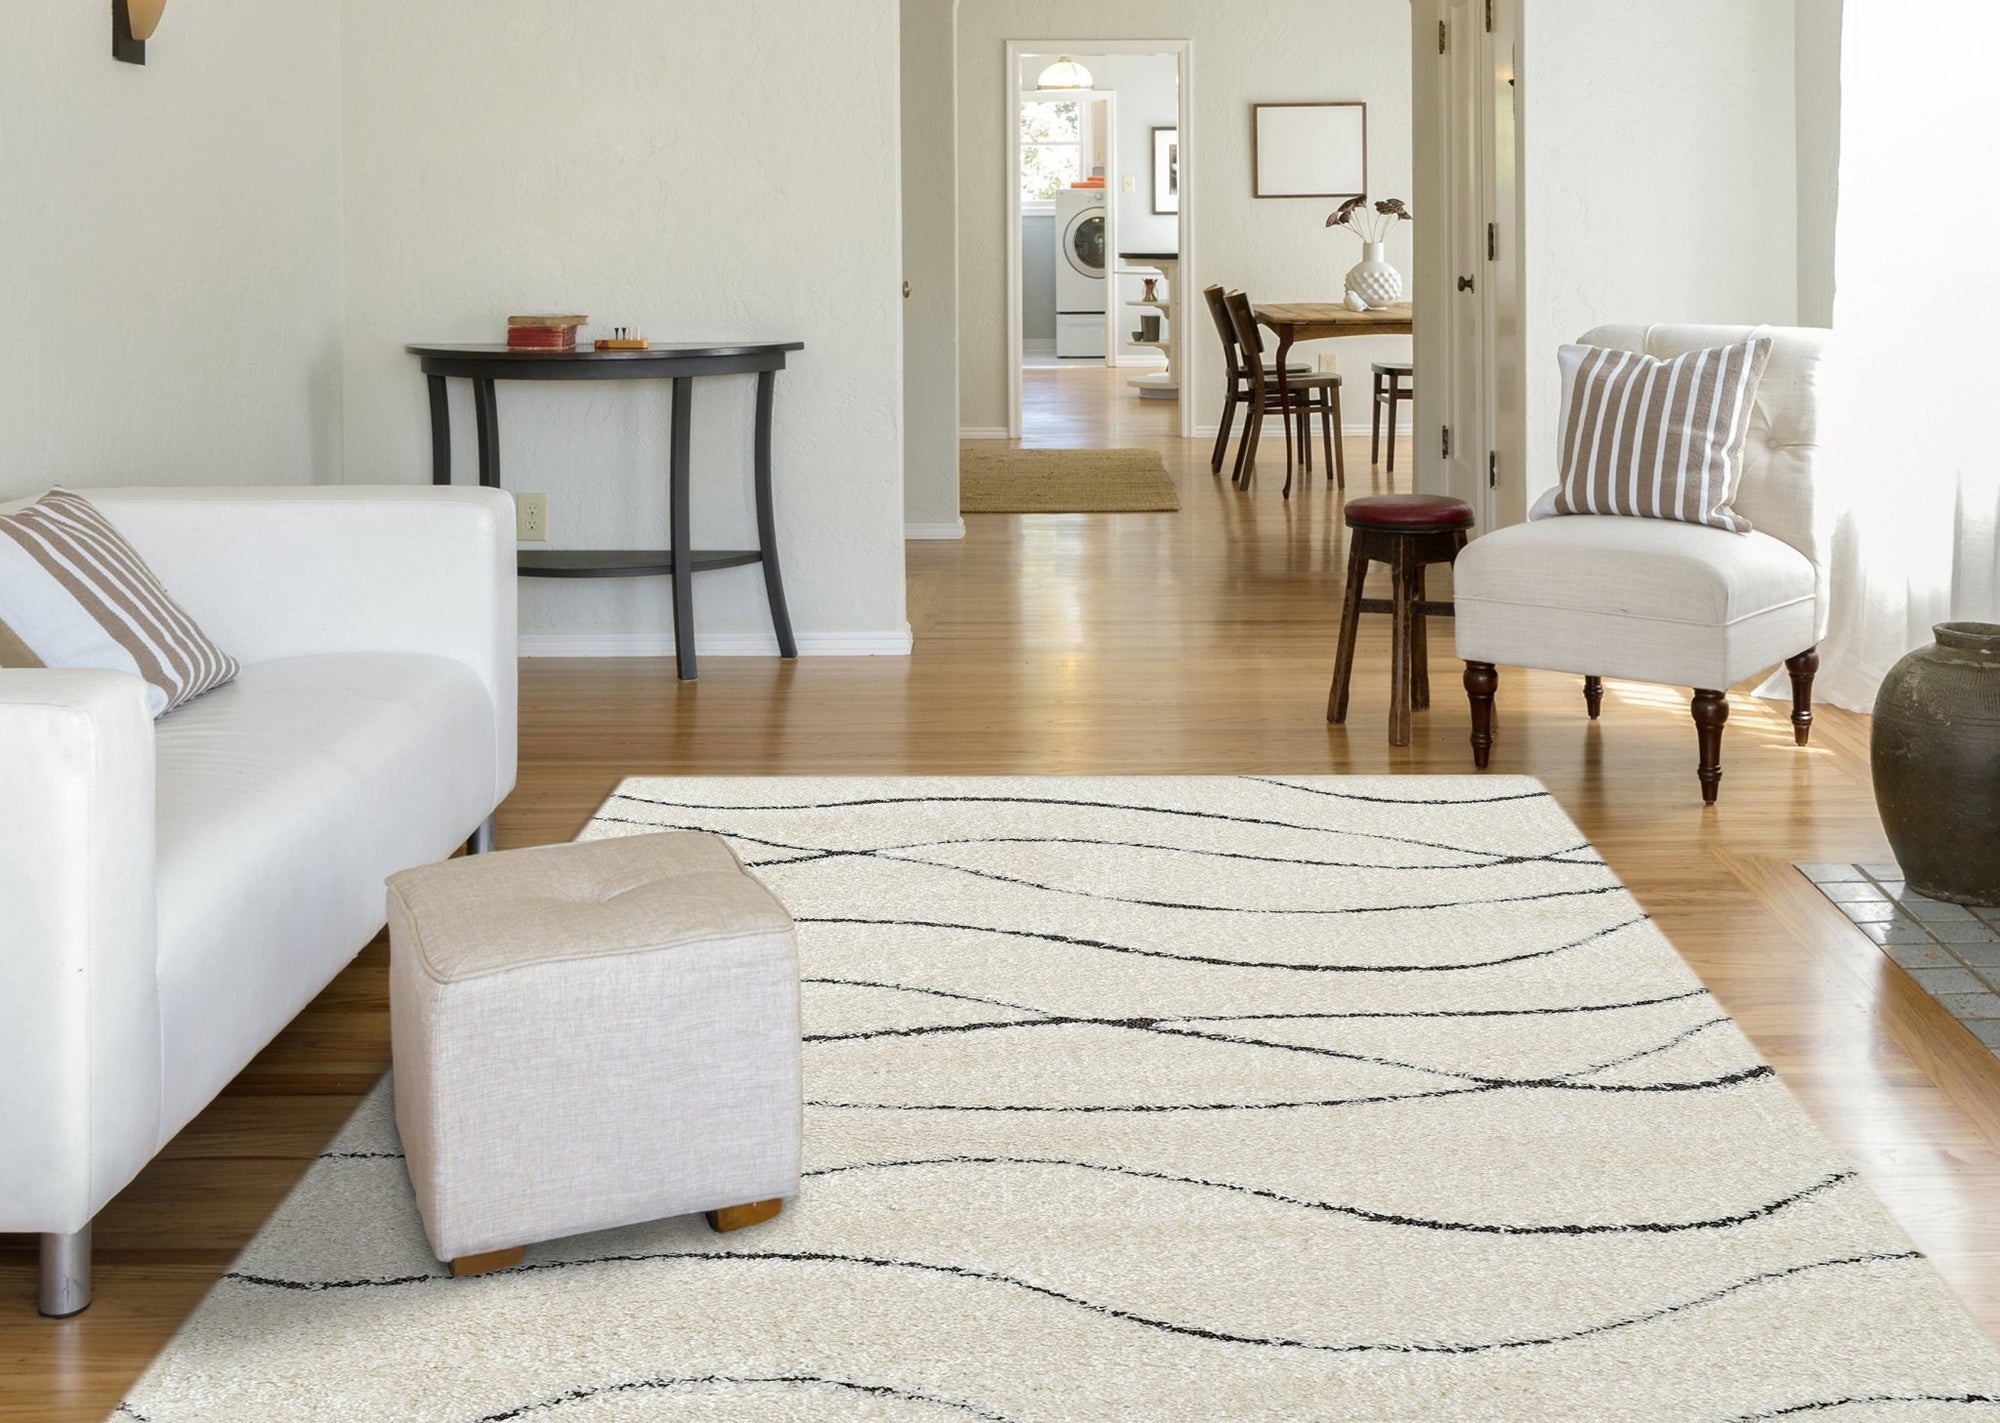 6 Rules for Choosing A Dining Room Rug + Pretty Rug Souces - StoneGable